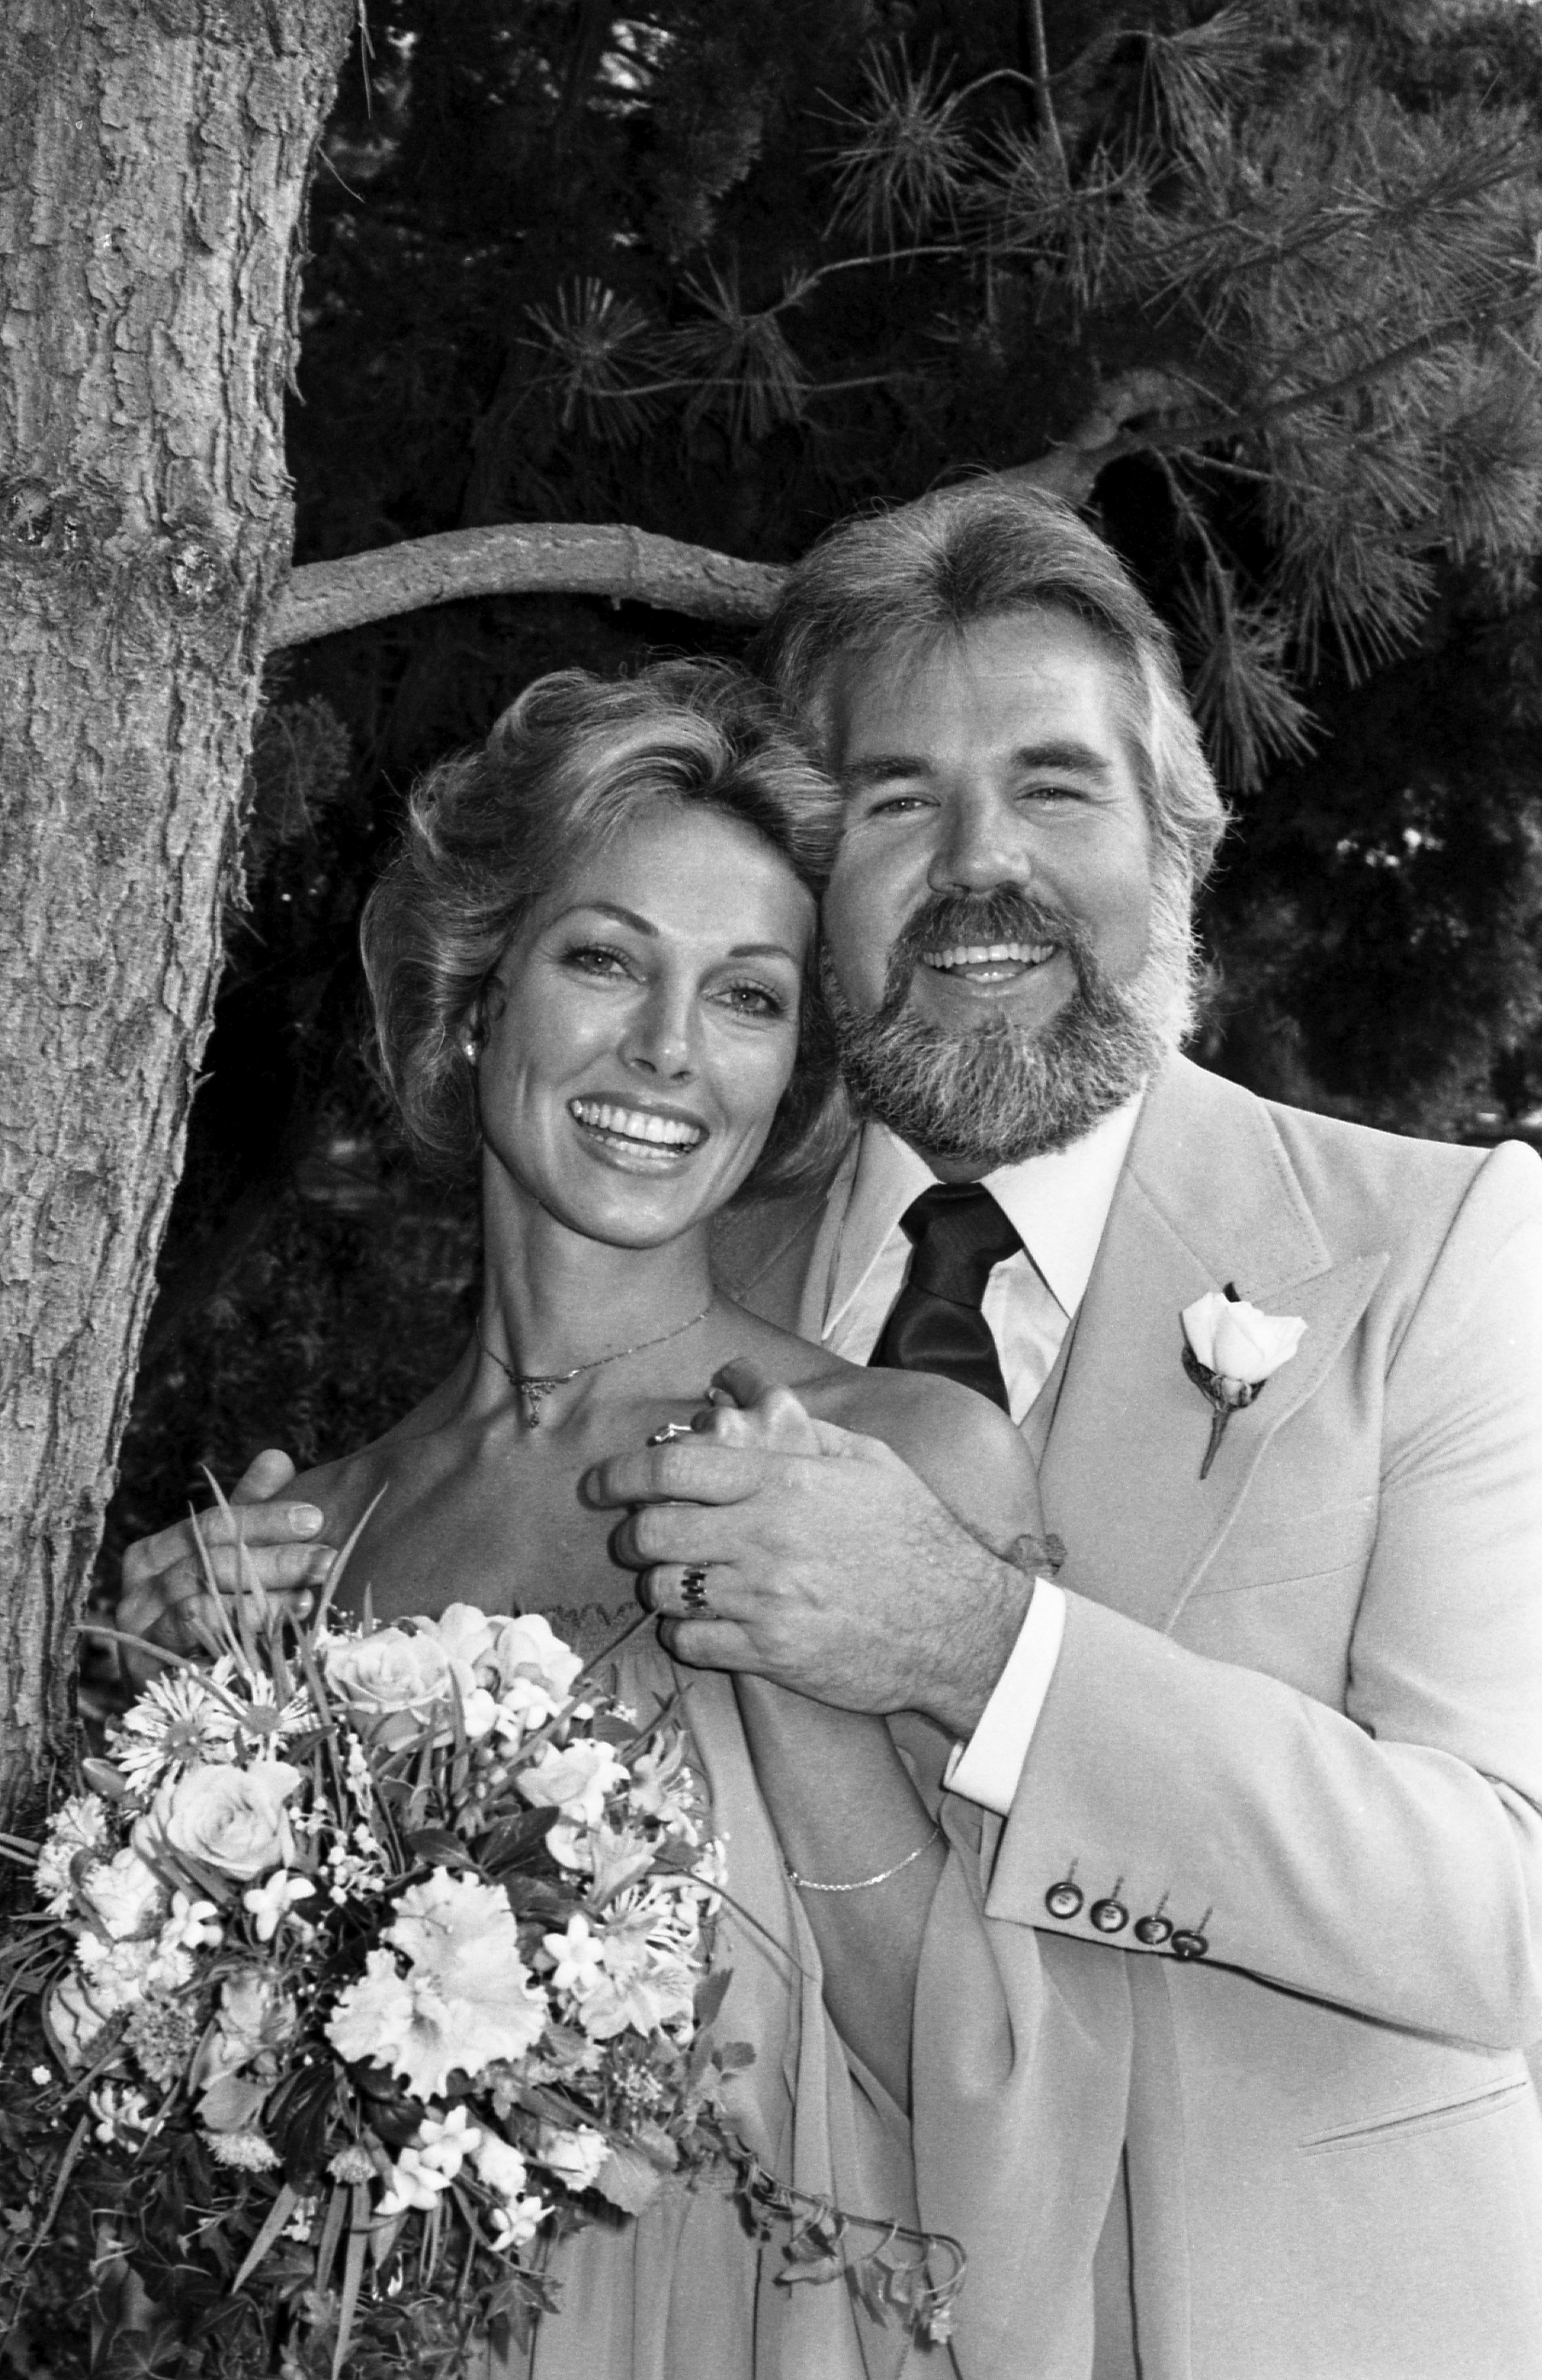 Kenny Rogers and Marianne Gordon photographed after their nuptials at the Rogers home. / Source: Getty Images